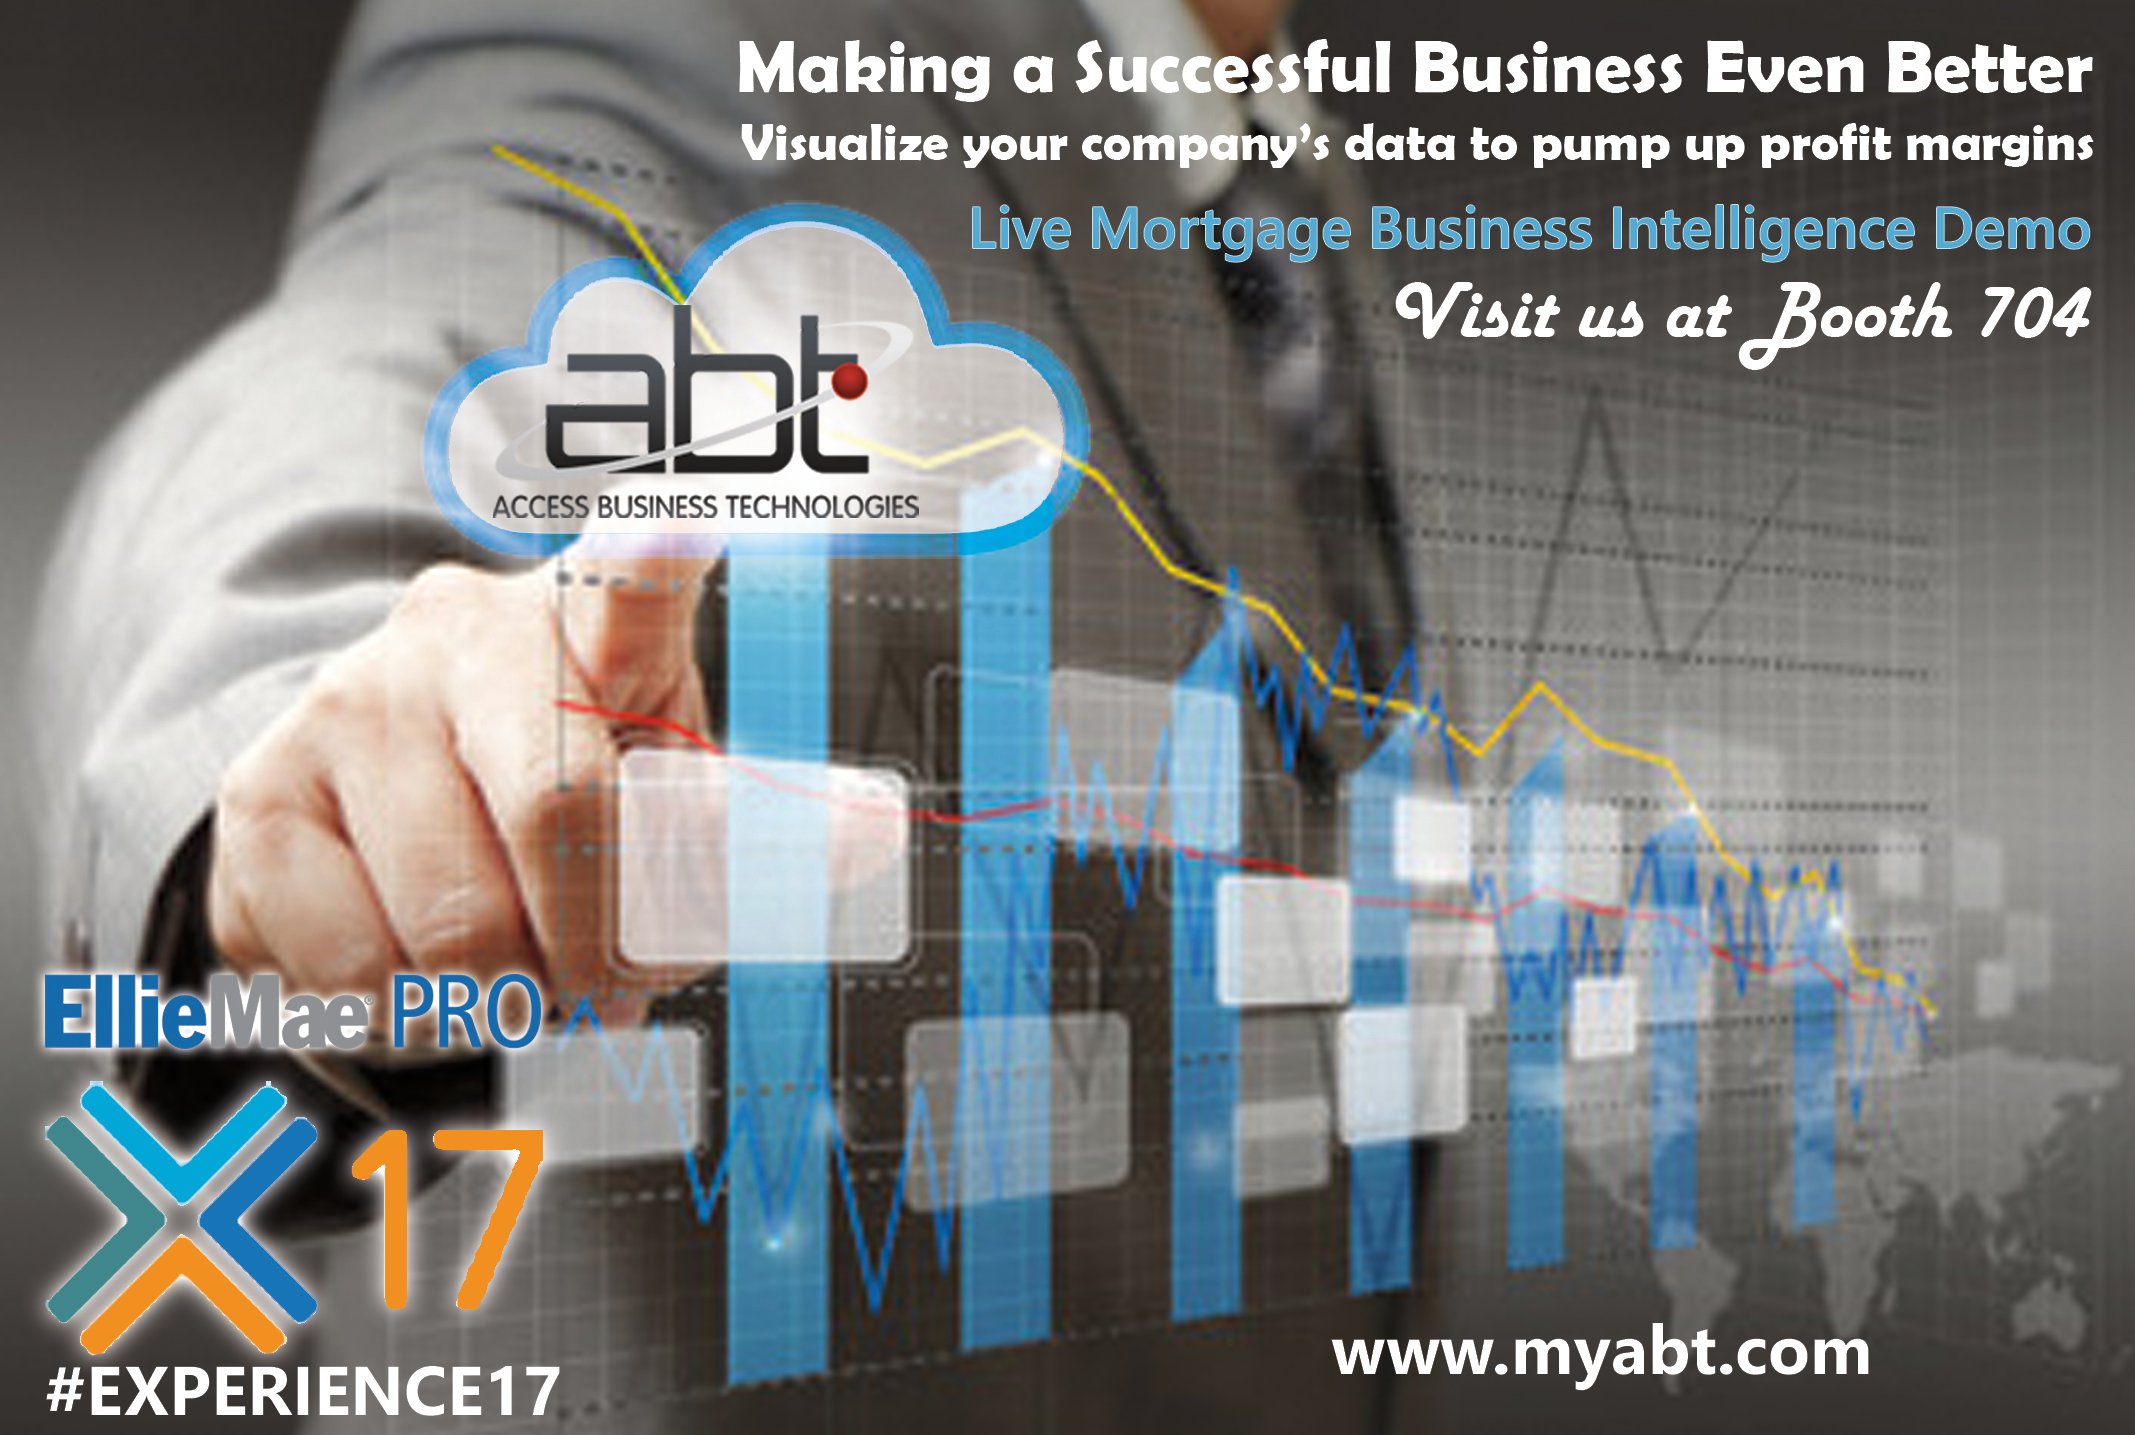 ABT will be at the Ascent Live 2017 Mortgage Cadence Conference